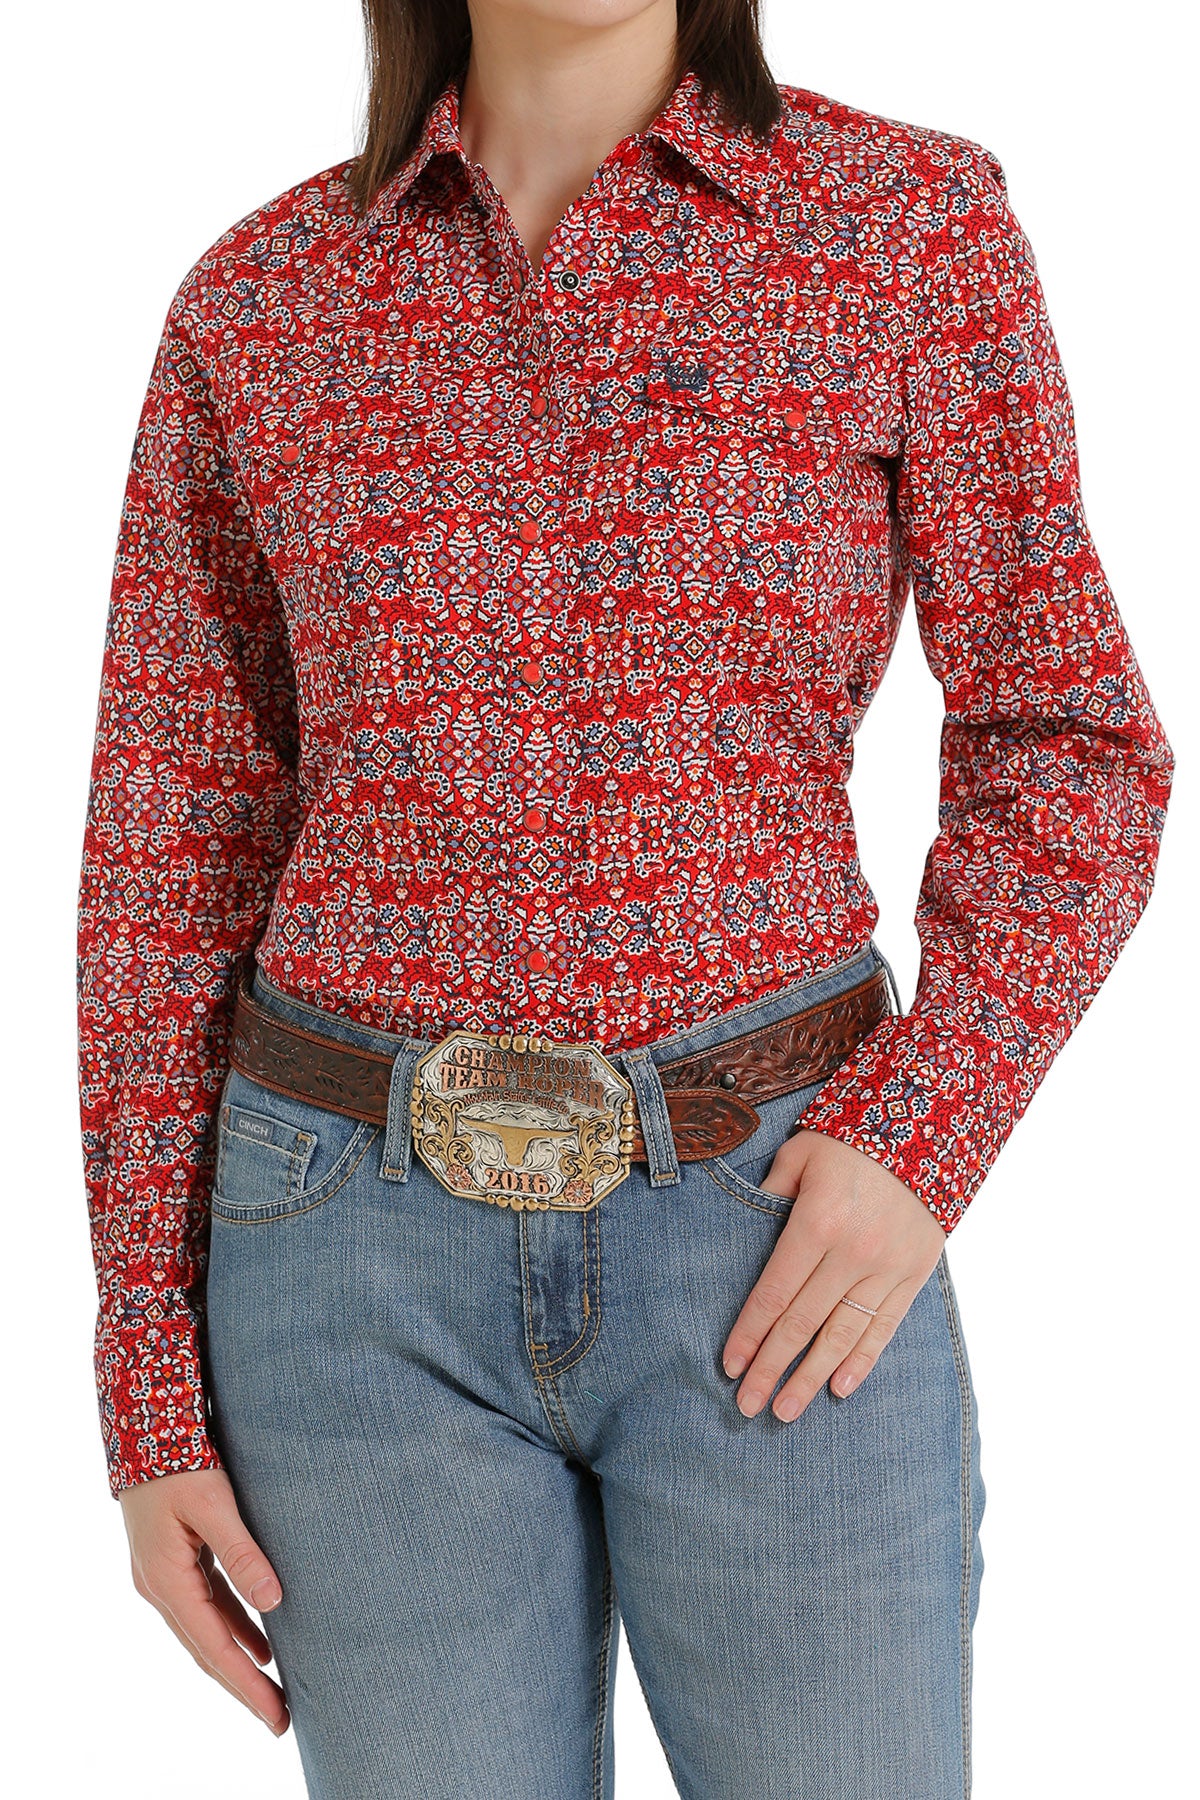 Cinch Women's Red Paisley Print Long Sleeve Shirt STYLE MSW9201039